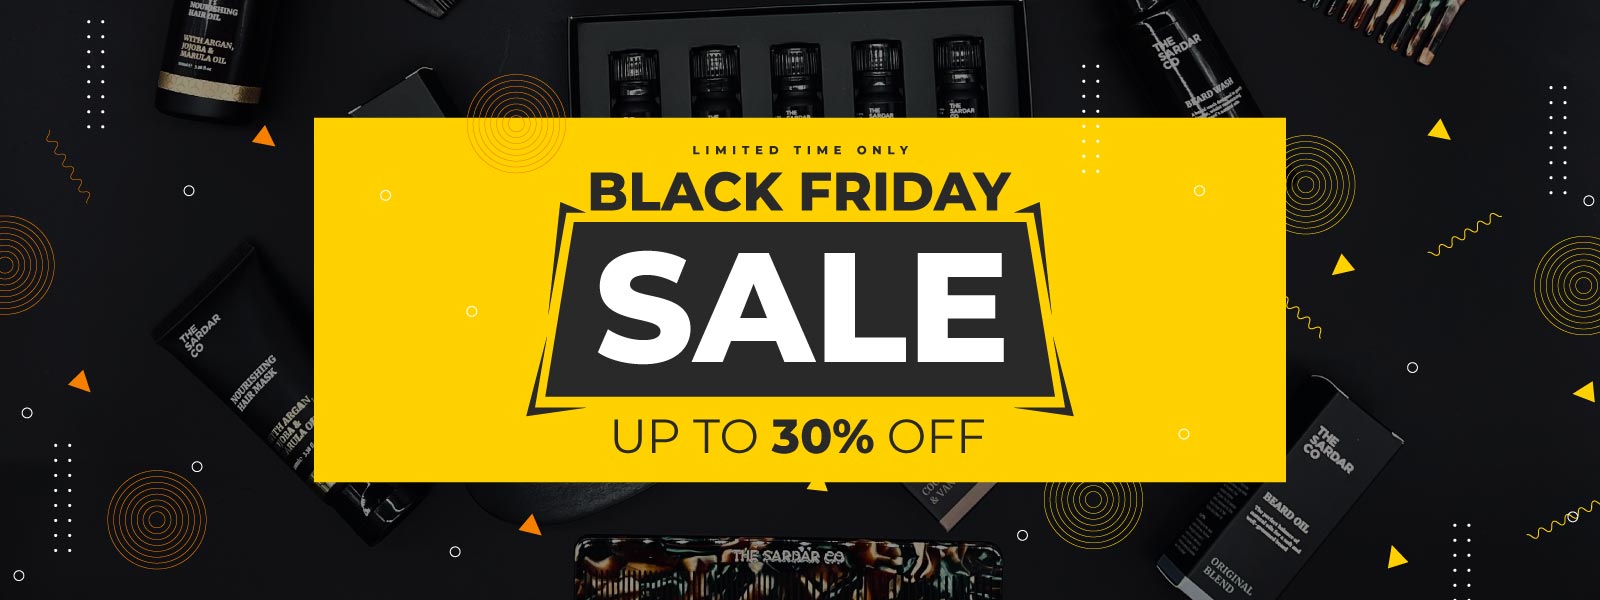 Black friday sale up to 30% off